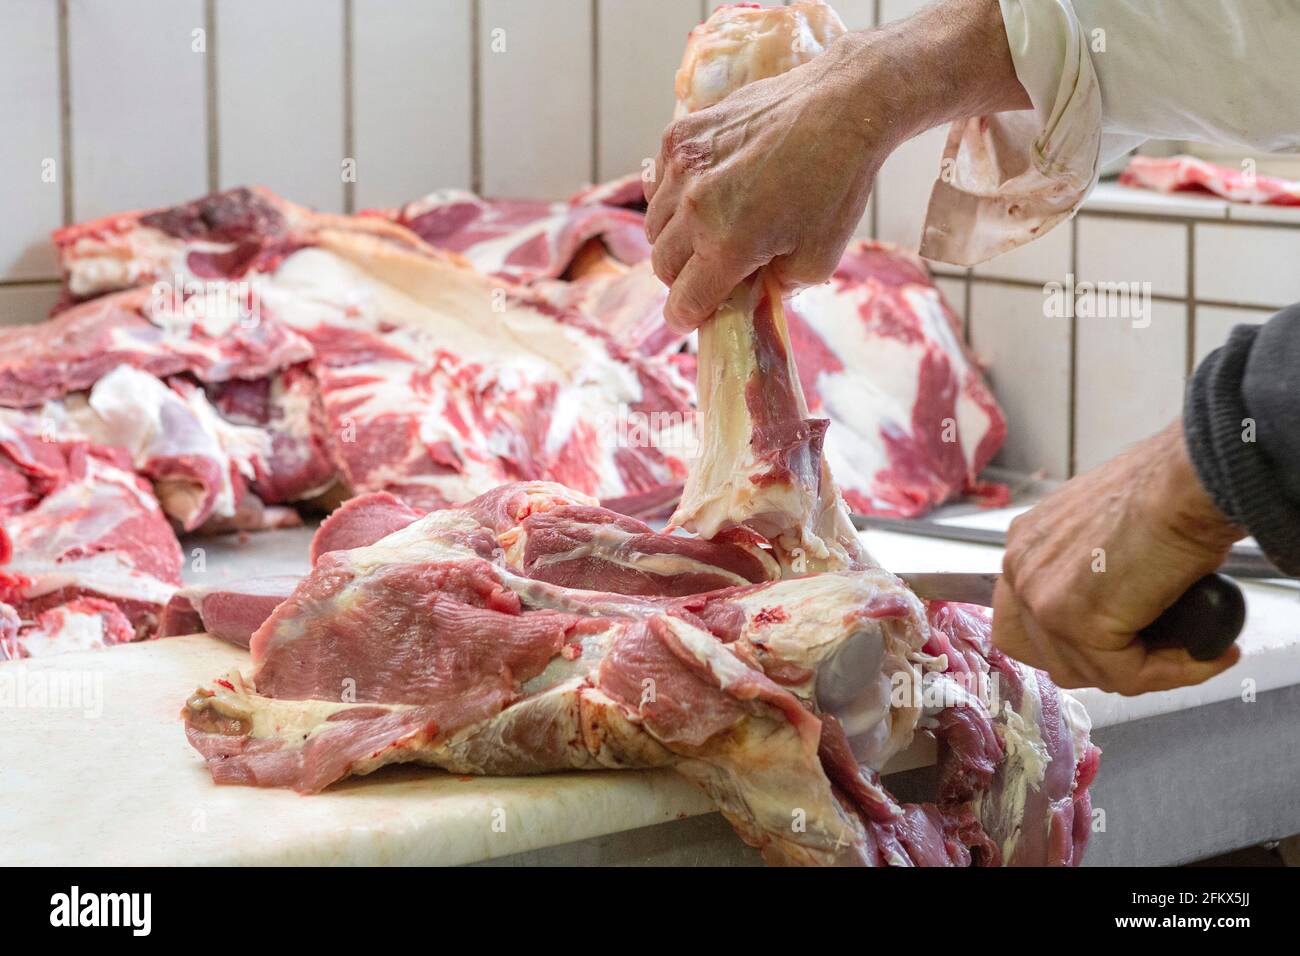 Butcher, Beef Cut Up Stock Photo